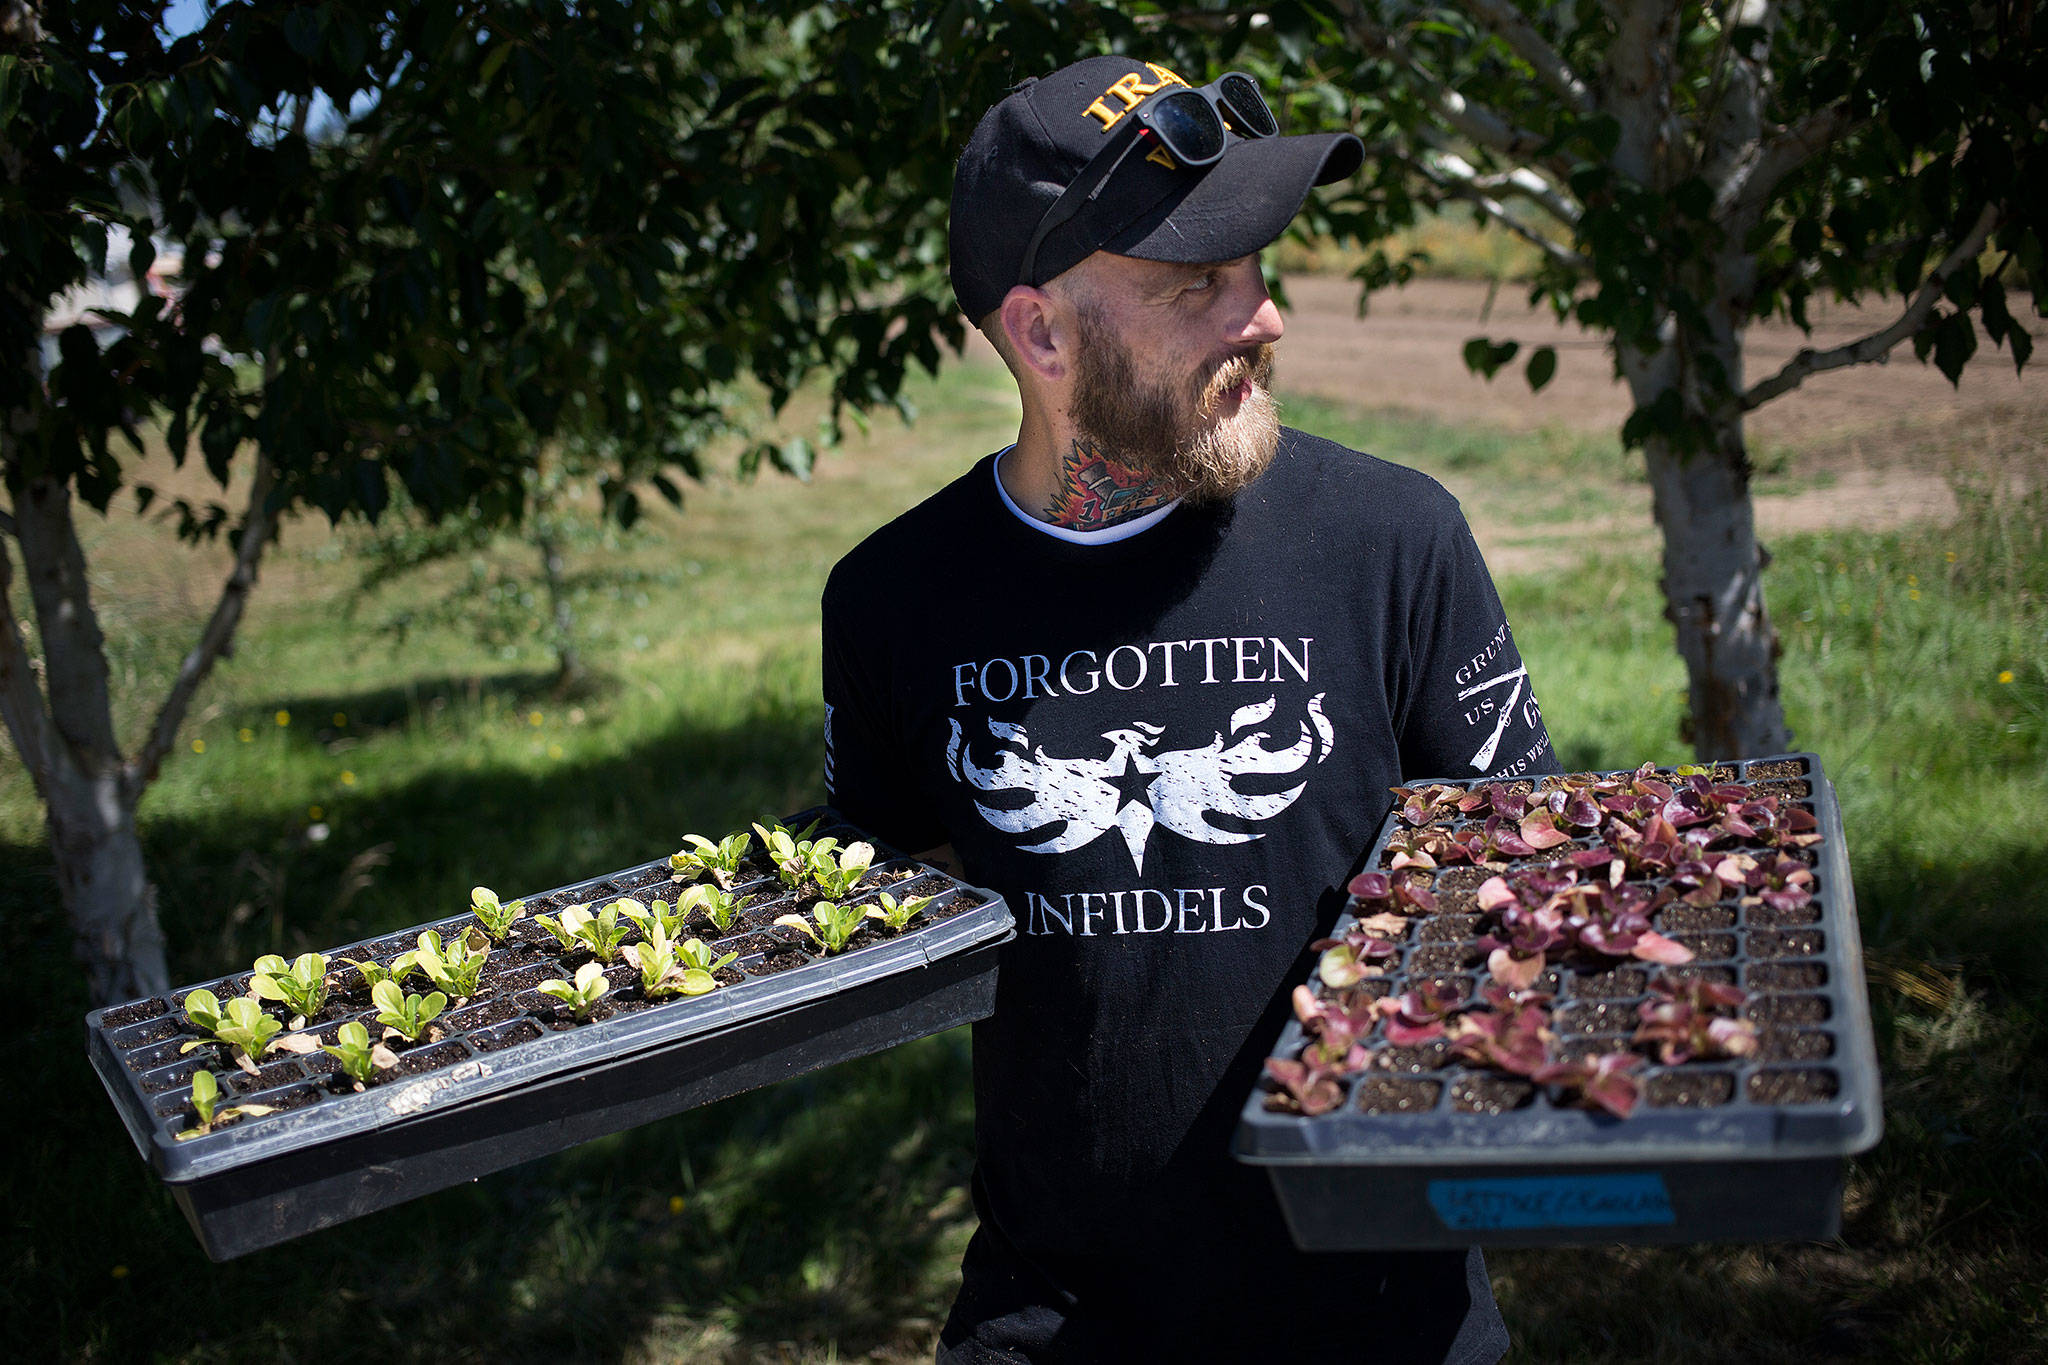 Seth McBride, 34,heads home with two trays of lettuce plants after volunteering at Growing Veterans, one of three farms encouraging vets to volunteer and learn to farm, Tuesday, July 25, 2017 in Mount Vernon, Wa. (Andy Bronson / The Herald)